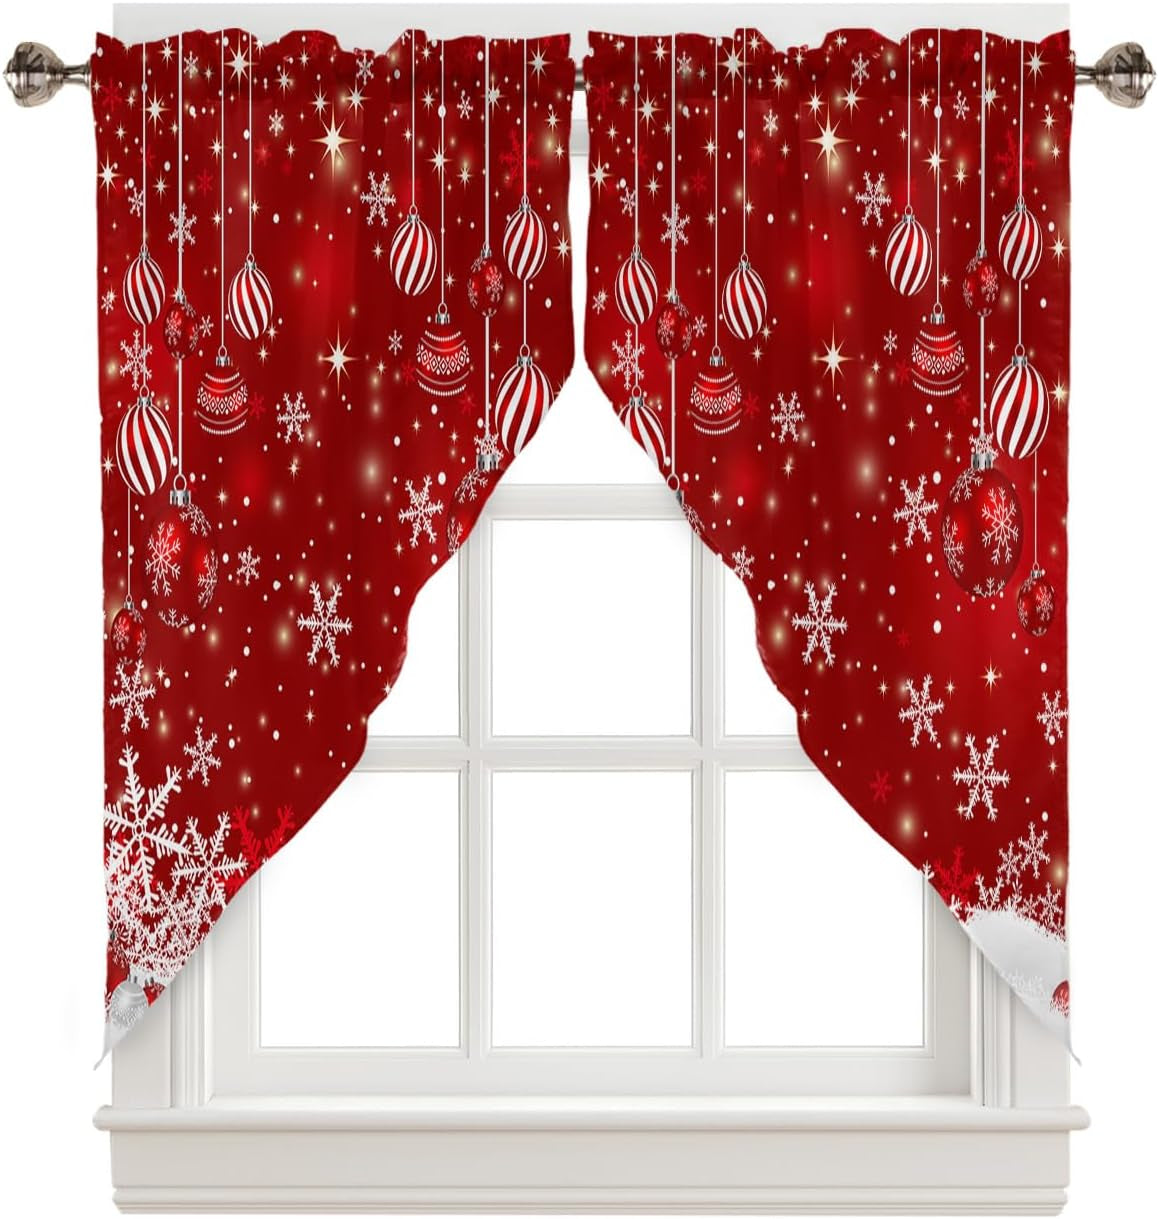 Christmas Kitchen Curtains Winter Snowflakes Window Valance Set,Red Xmas Balls Ornaments Rod Pocket Curtains Swag for Bedroom Living Room, Sparkle Snow Xmas Red Swag Valance 36" Long Set